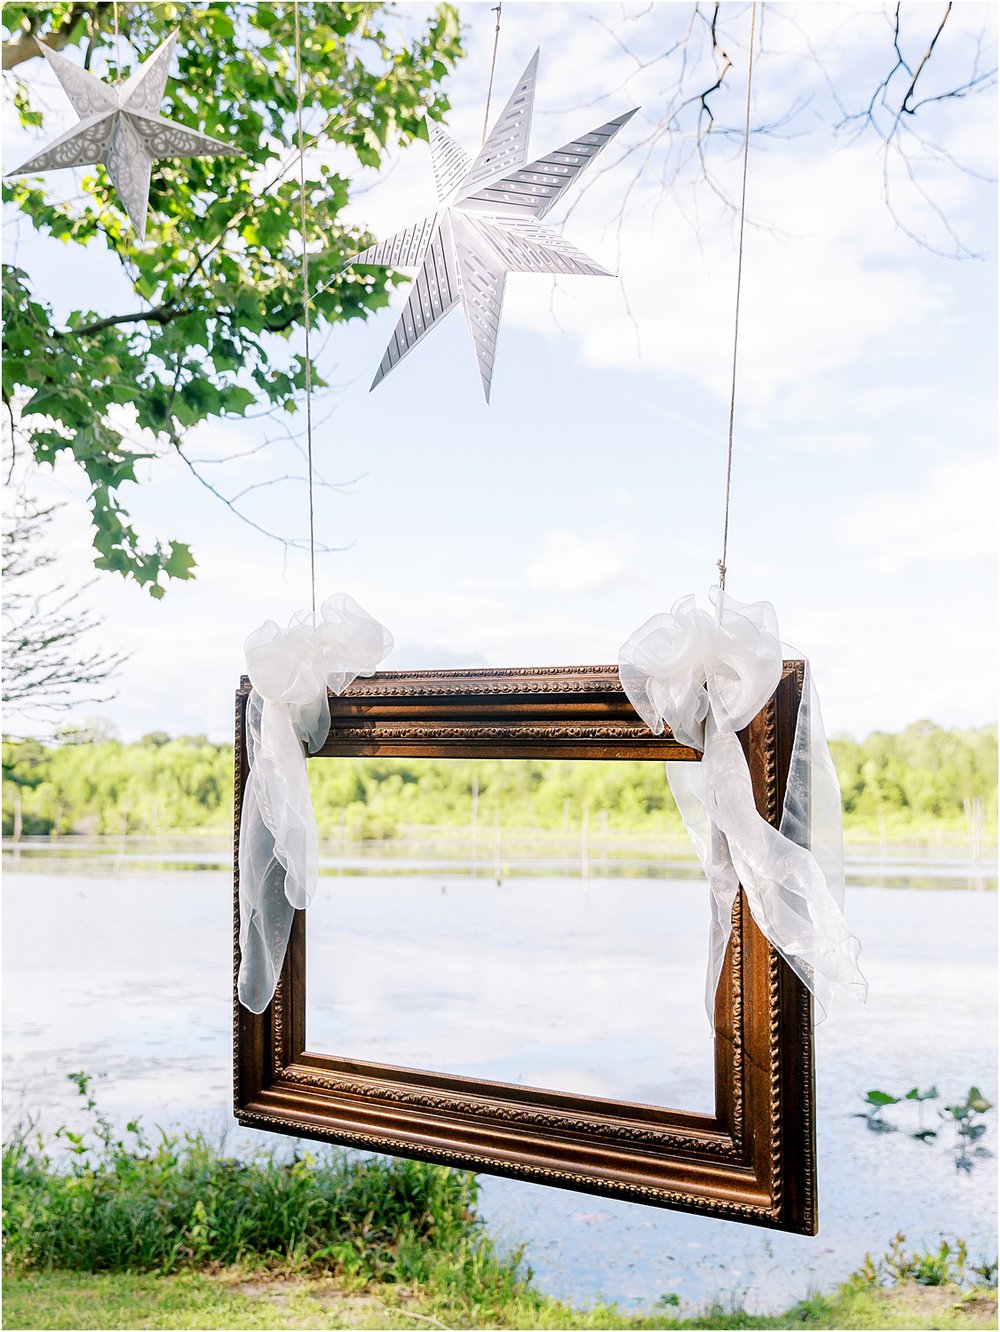 Rustic hanging picture frame wedding photoshoot